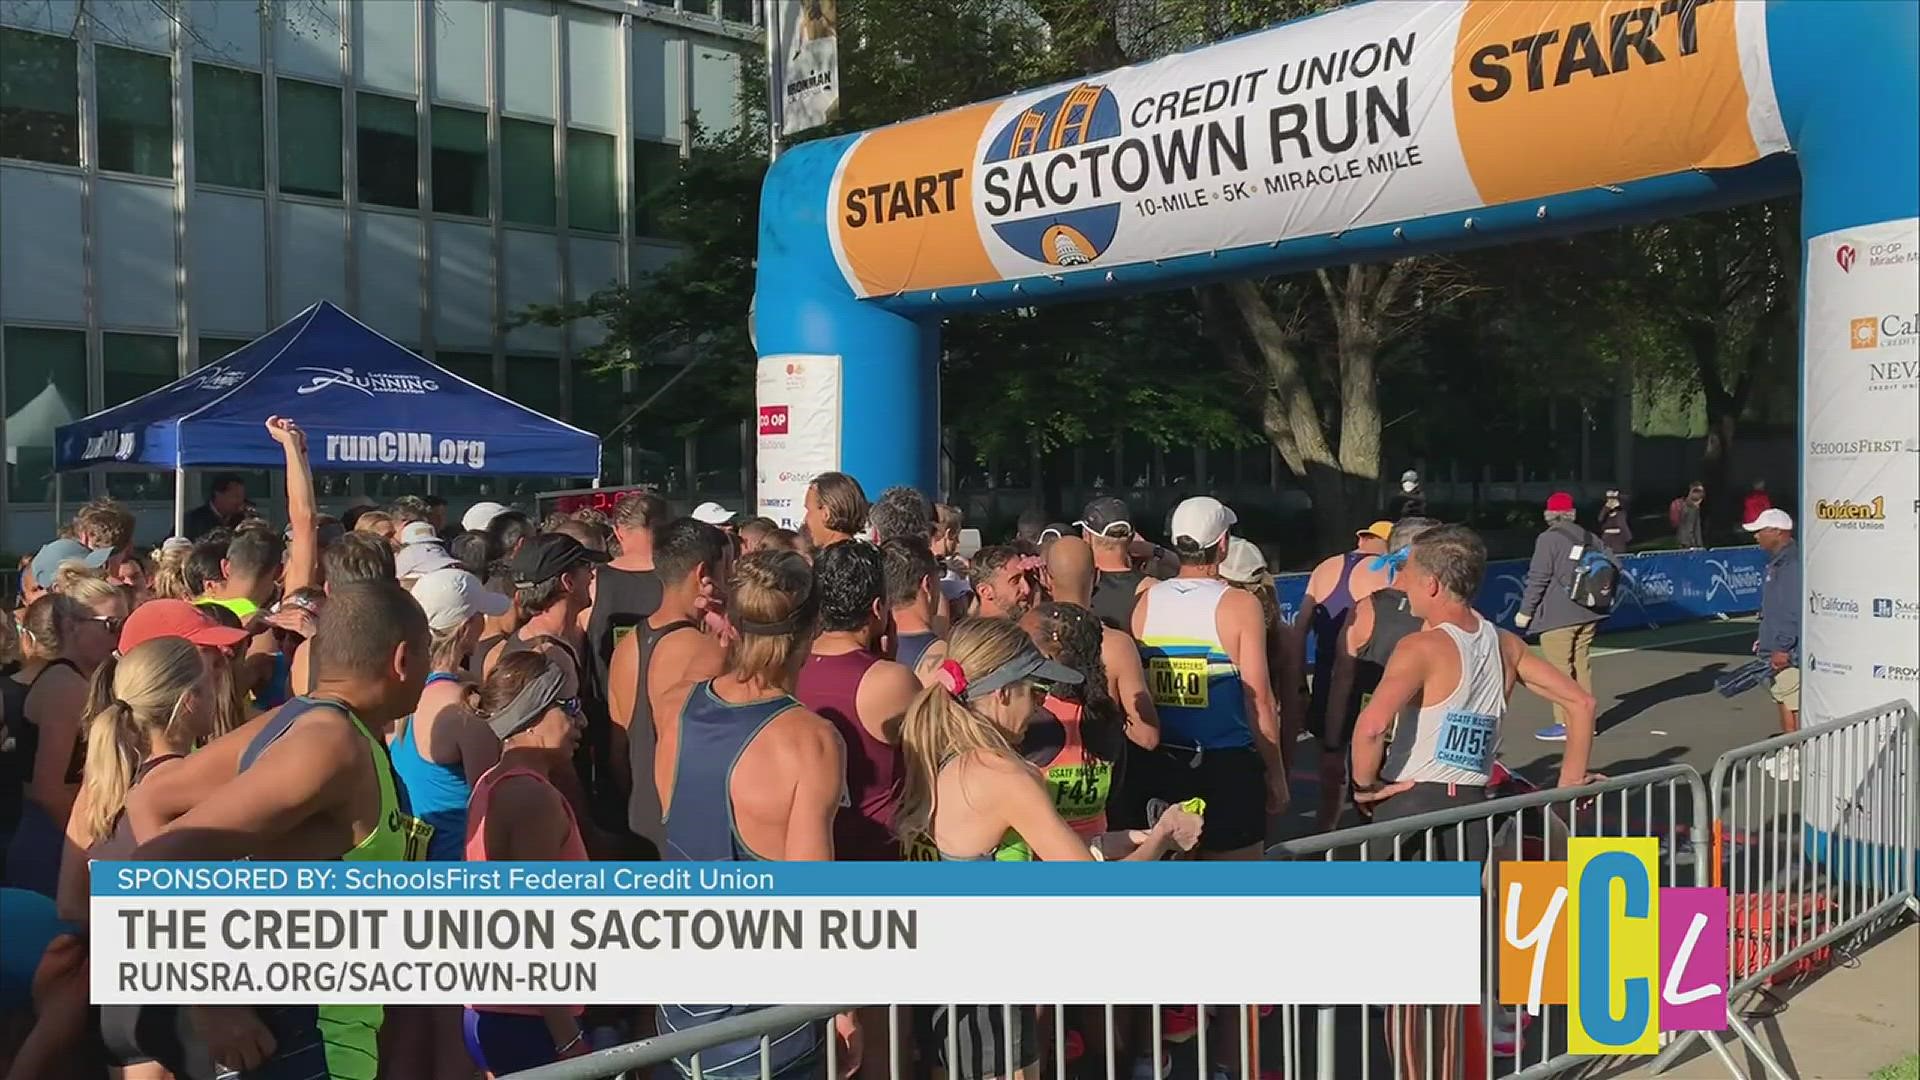 The Credit Union Sactown Run raises money for the Children's Miracle Network and benefits UC Davis Children's Hospital! This segment is paid by SchoolsFirst FCU.